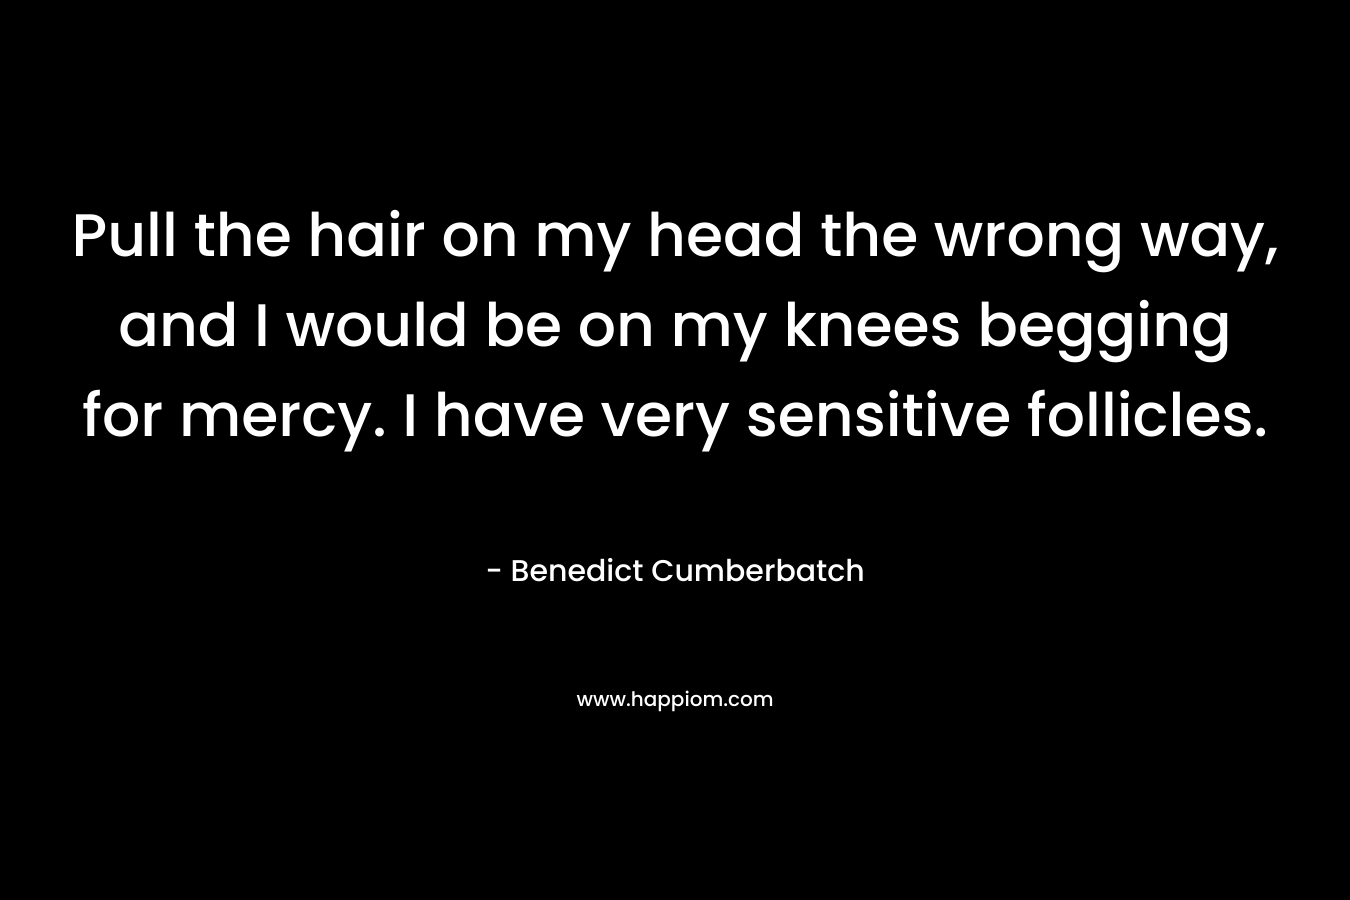 Pull the hair on my head the wrong way, and I would be on my knees begging for mercy. I have very sensitive follicles. – Benedict Cumberbatch